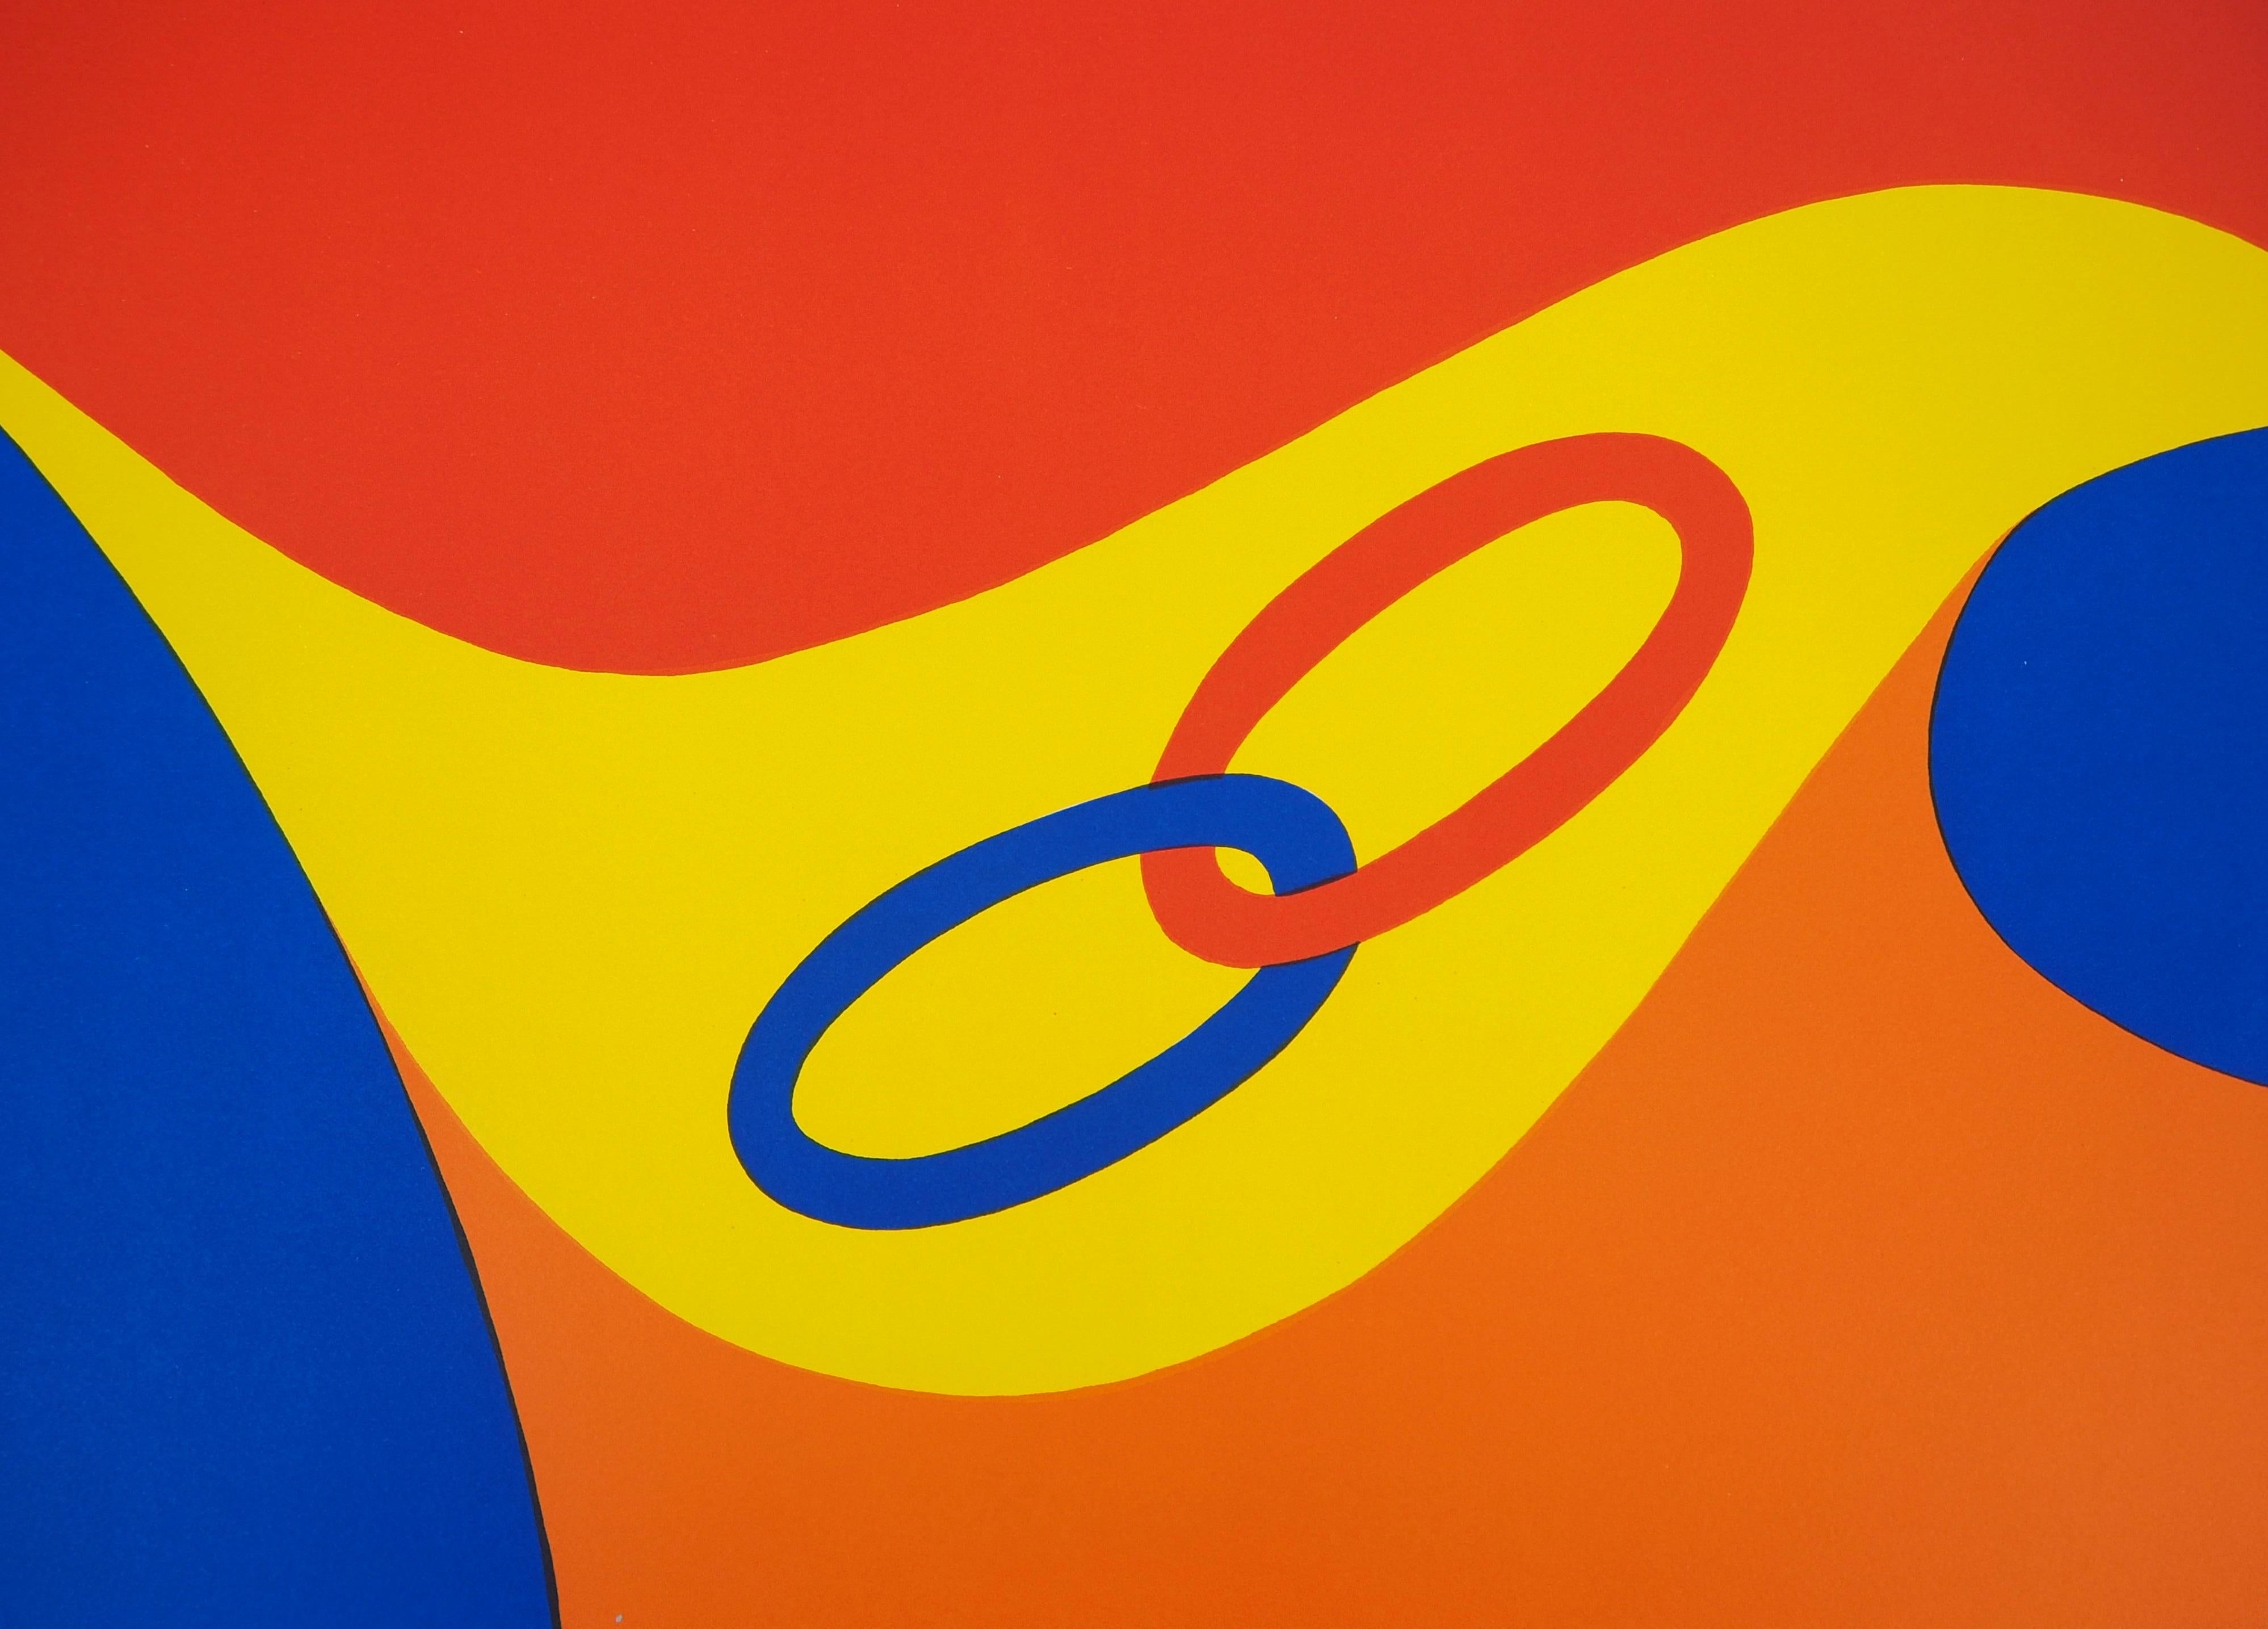 Flying Colors - Rings, 1974 - Original lithograph, Signed - Print by Alexander Calder